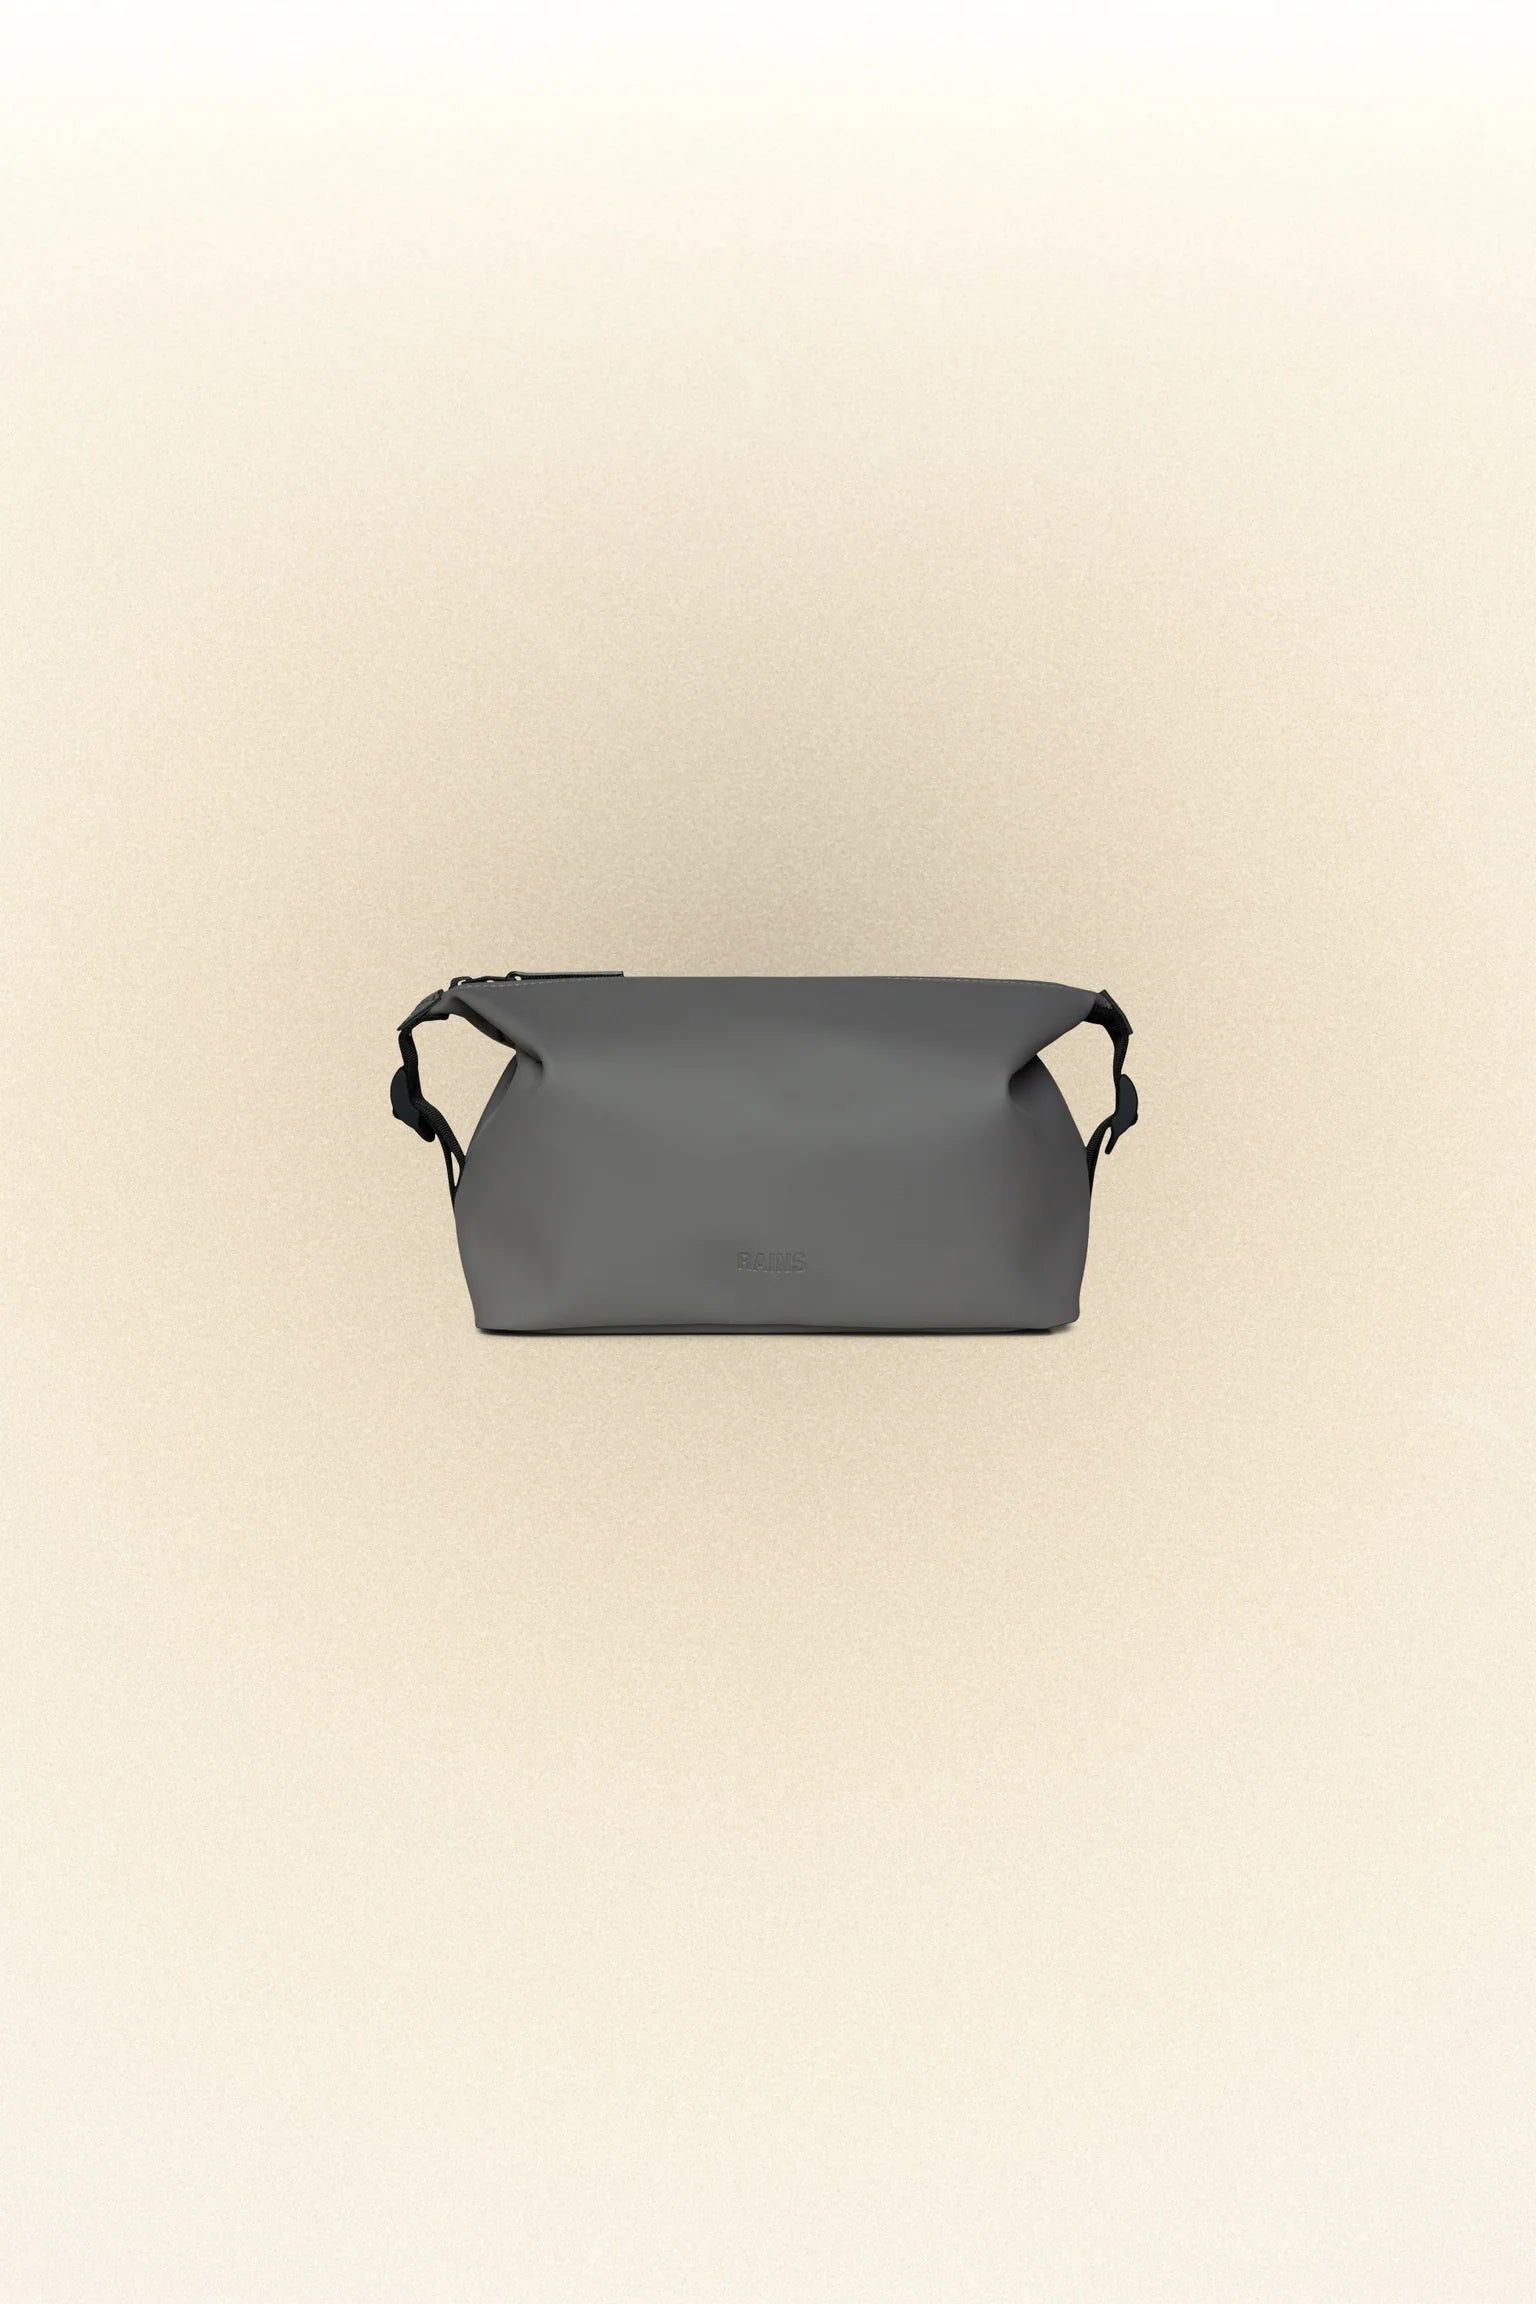 The Rains Hilo Wash Bag, a waterproof design, showcased in an image featuring a grey toiletry bag on a white background.